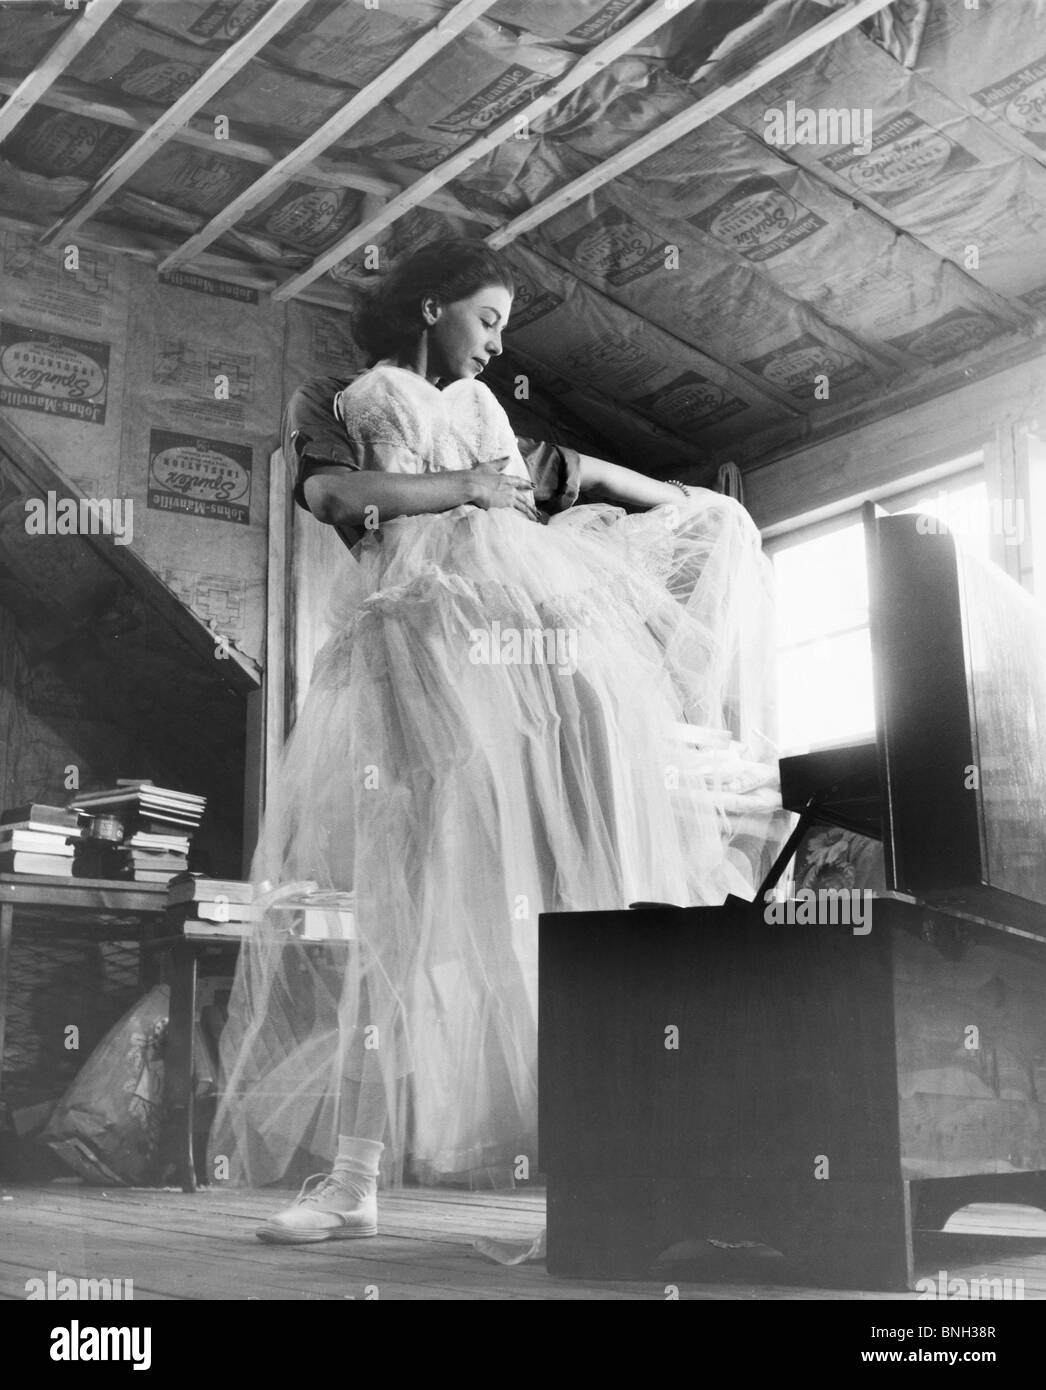 Low angle view of a young woman holding a dress Banque D'Images